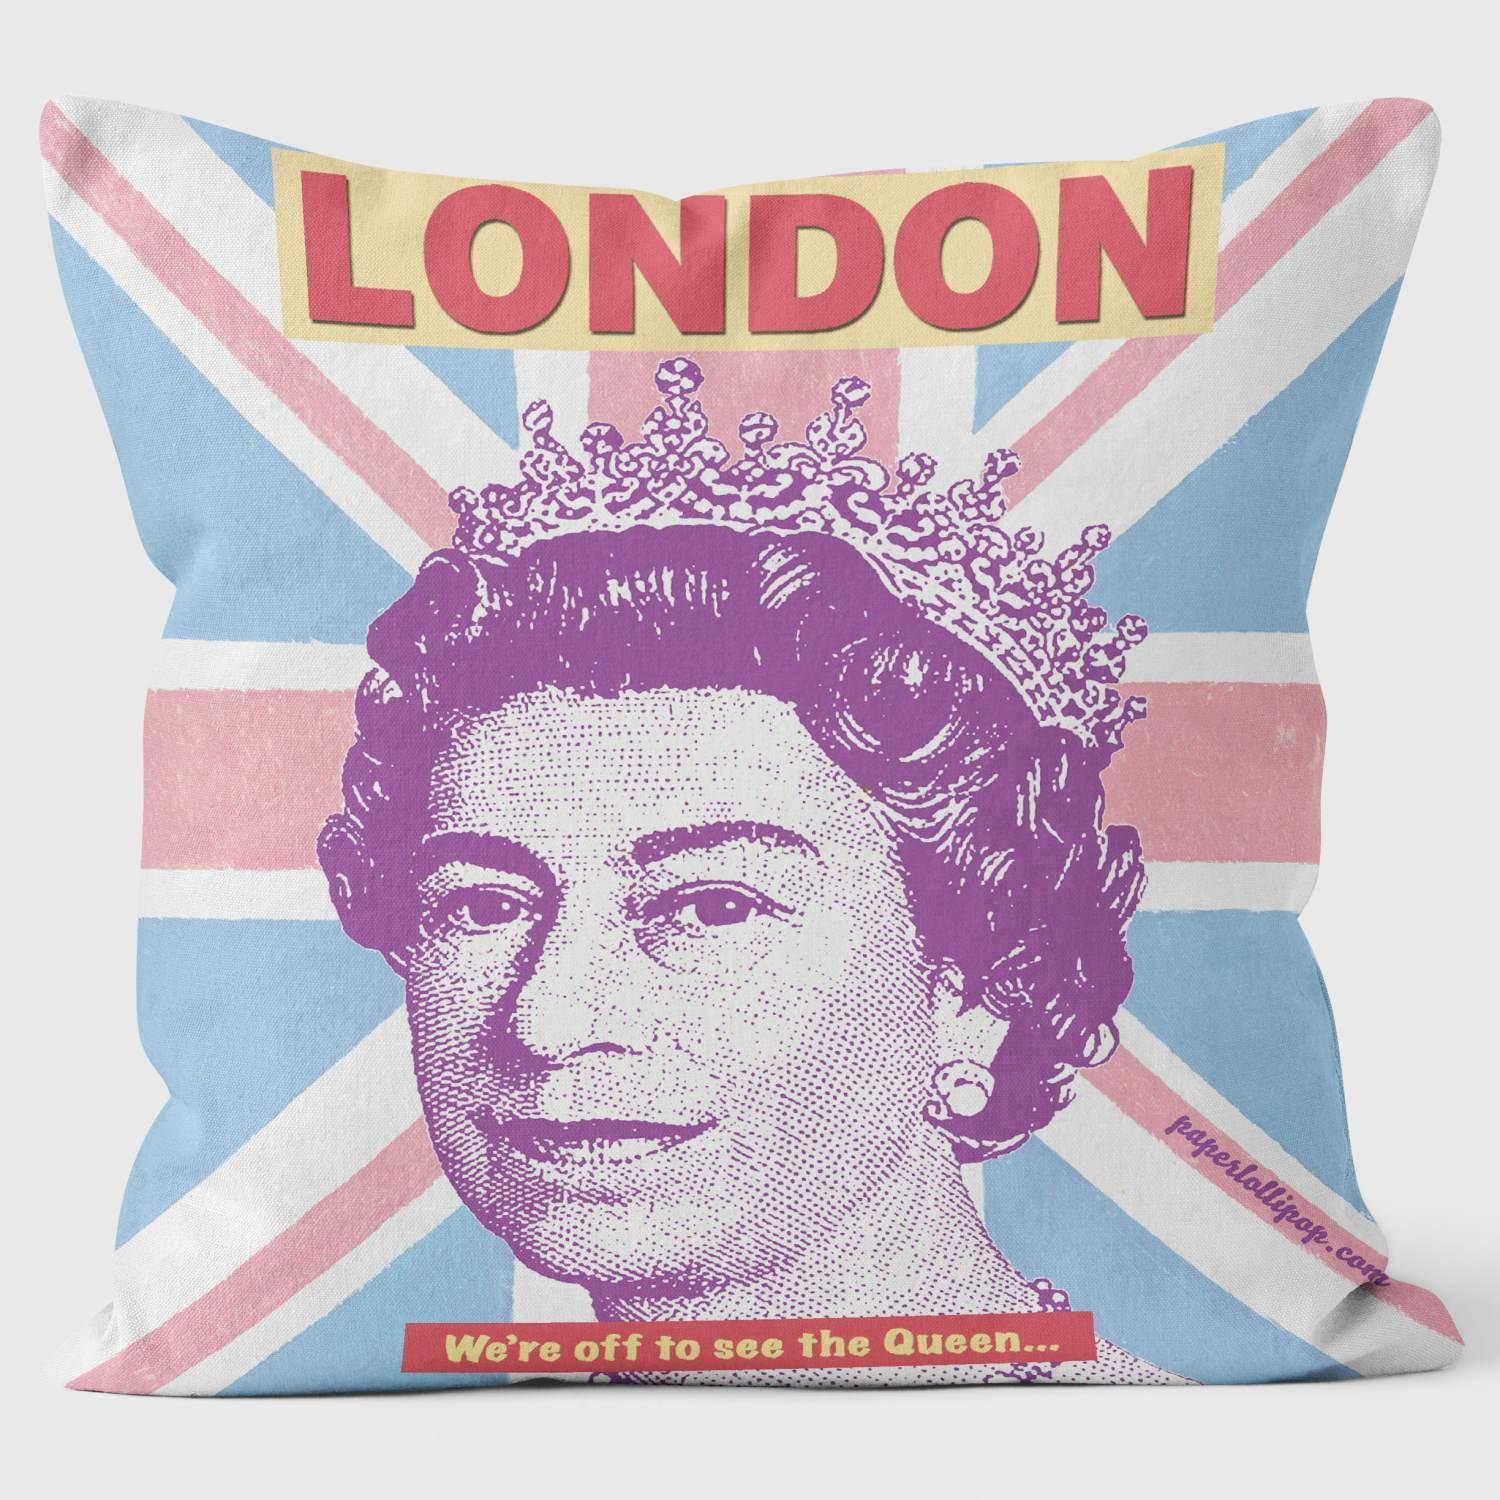 We Are Off To See The Queen Cushion - Paperlollipop Cushion - Handmade Cushions UK - WeLoveCushions